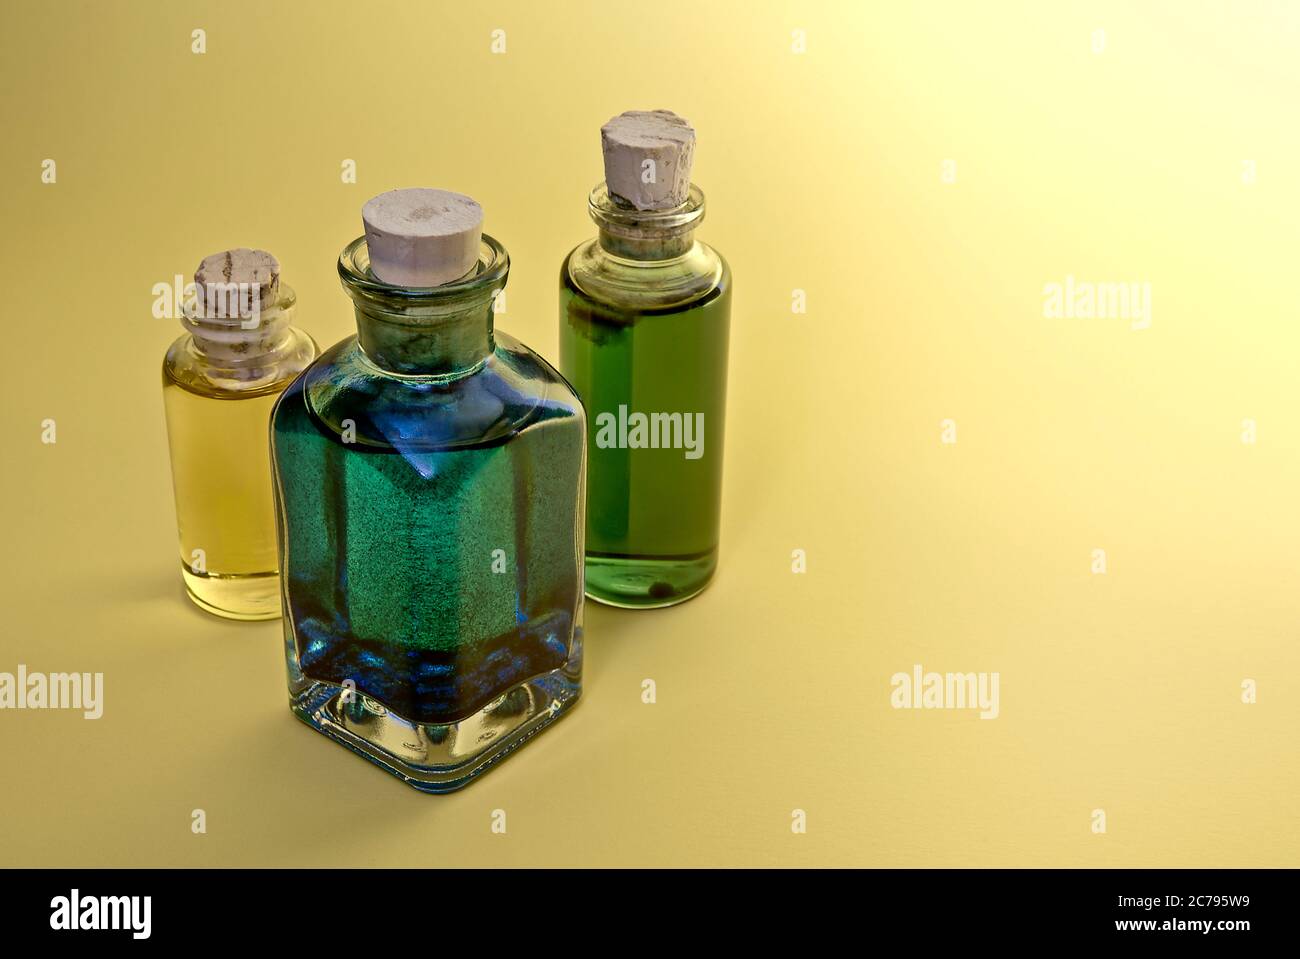 Old bottles with colored liquids Stock Photo